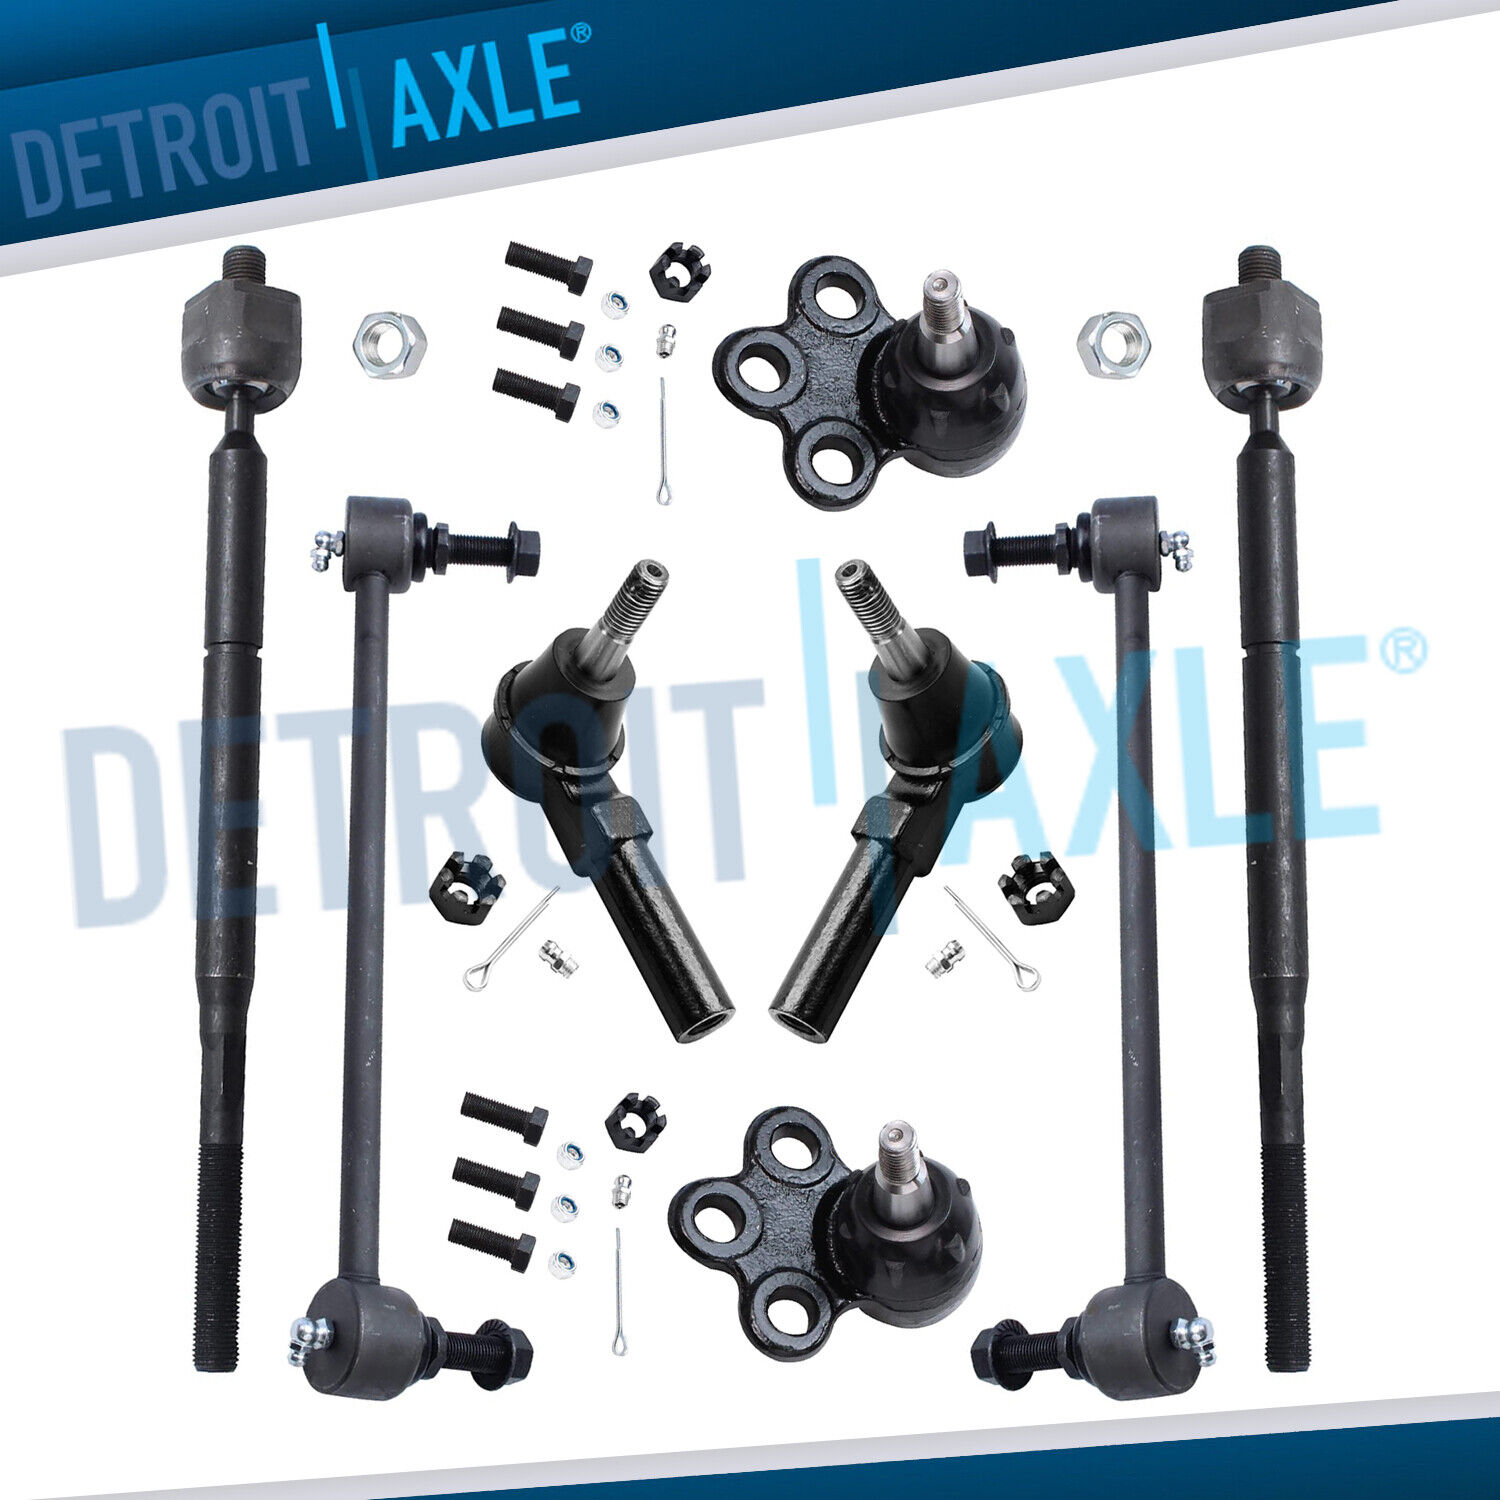 New 8pc Complete Front Suspension Kit for Chevrolet Equinox Torrent Saturn Vue